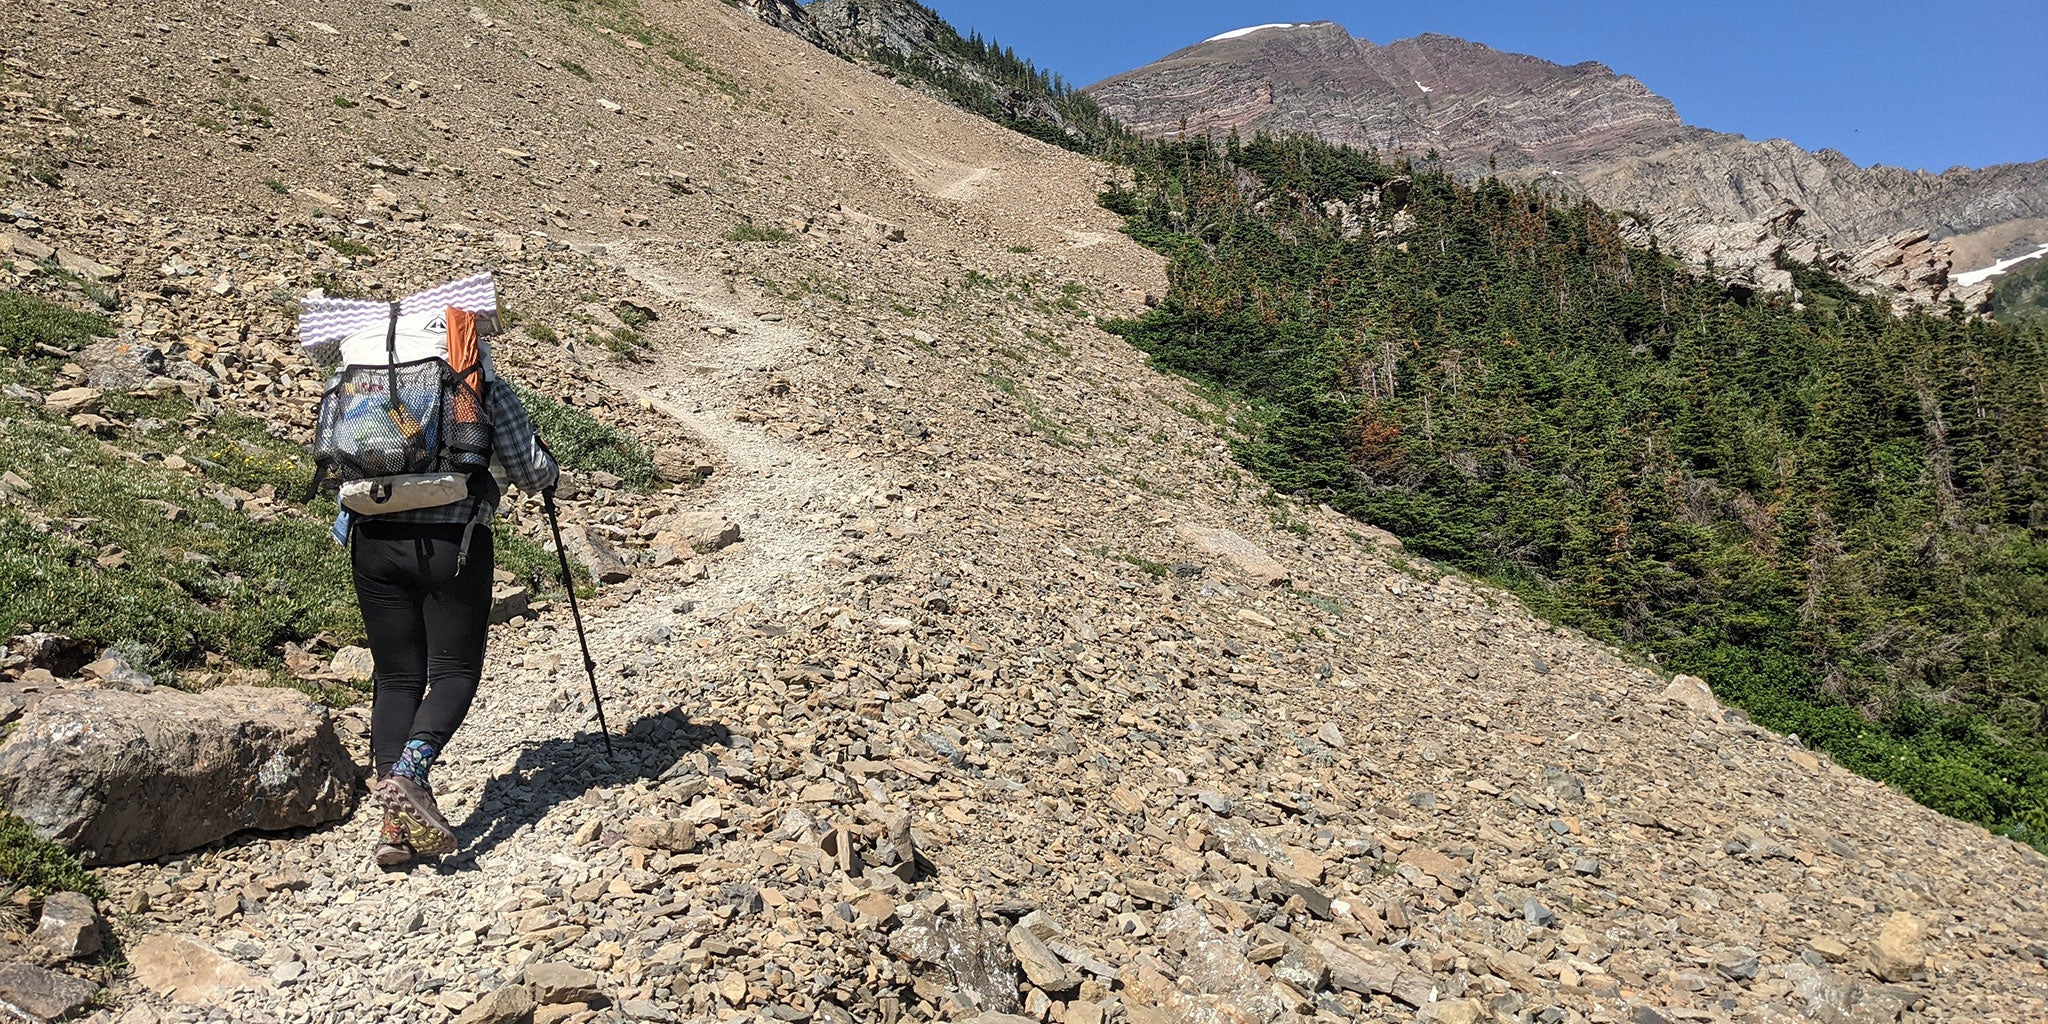 Hiking up a steep and loose scree field